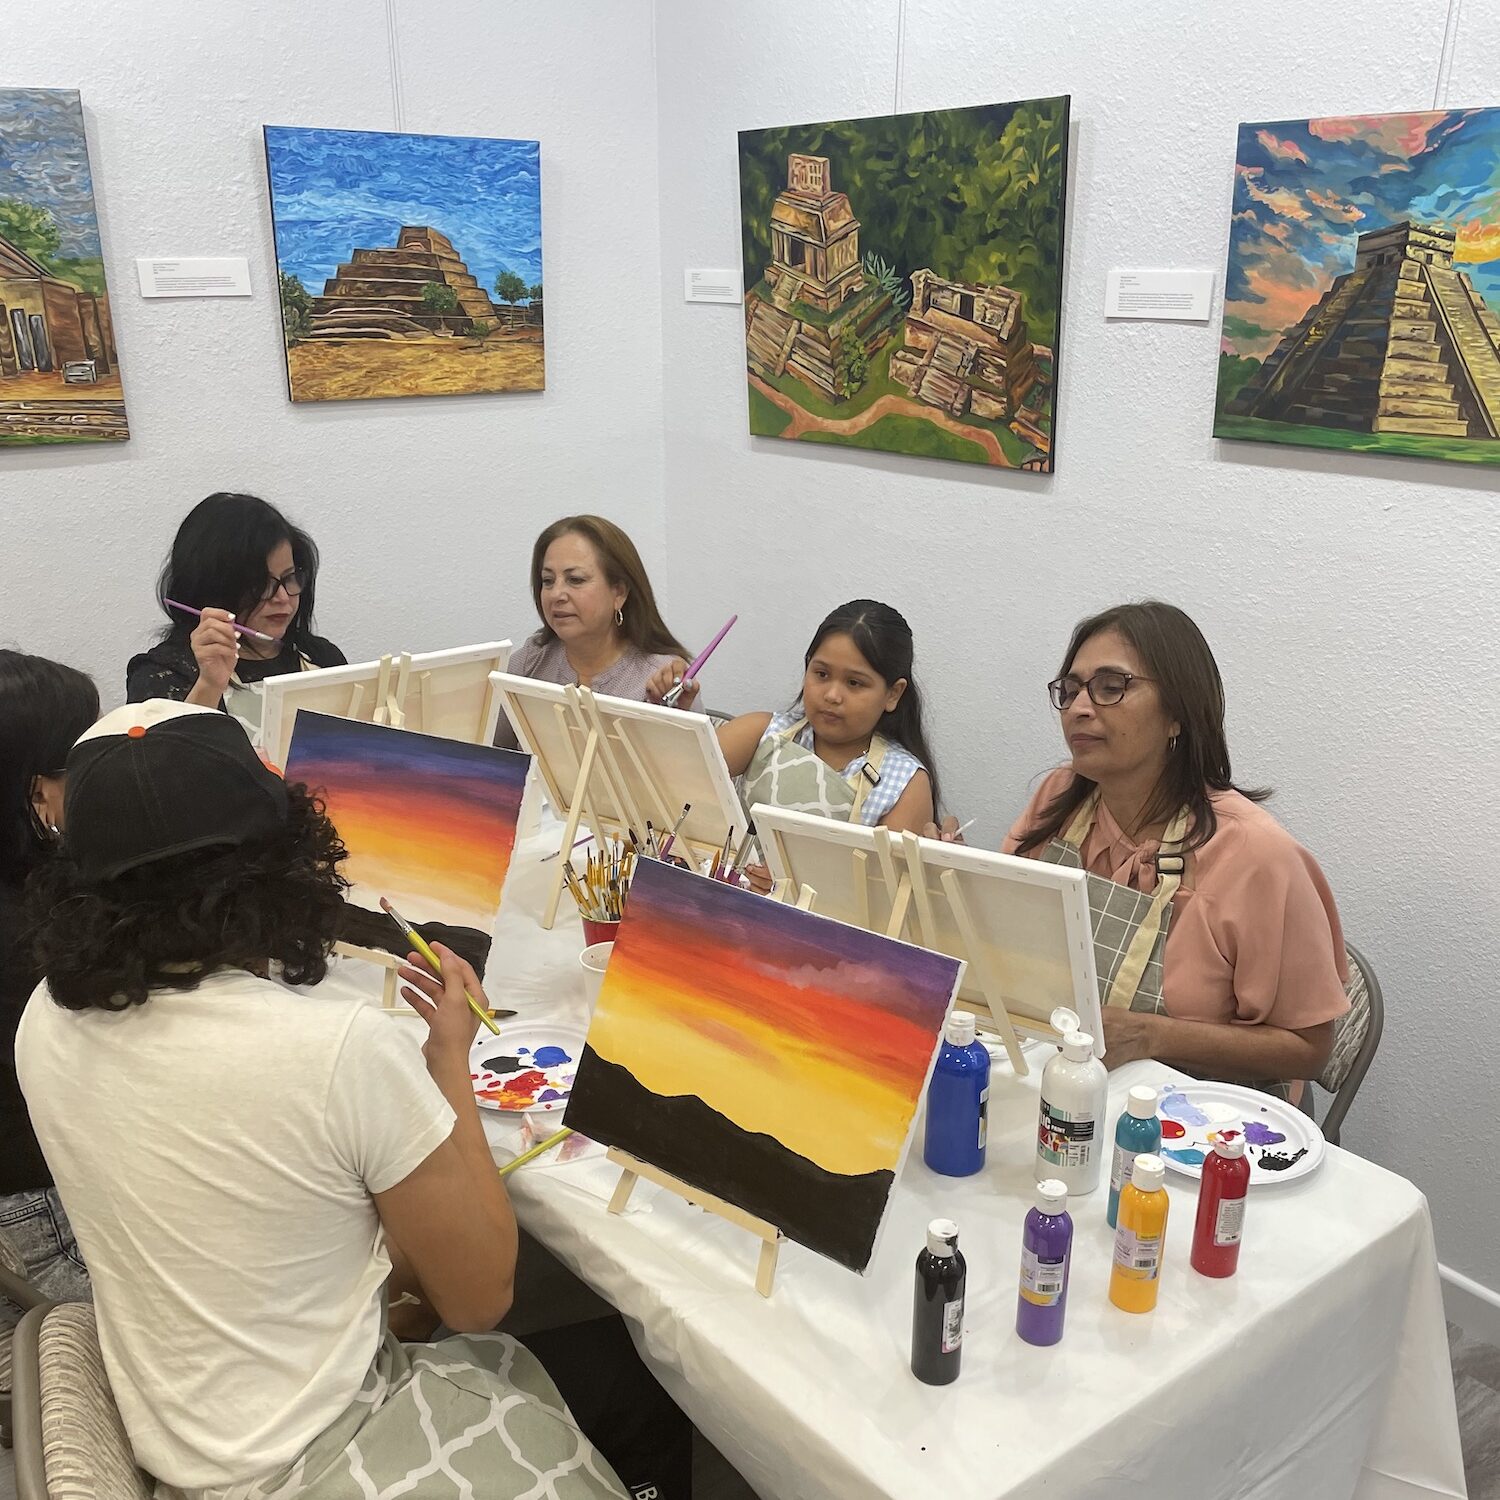 A painting class with art in the background at Kreative Grounds Cafe.